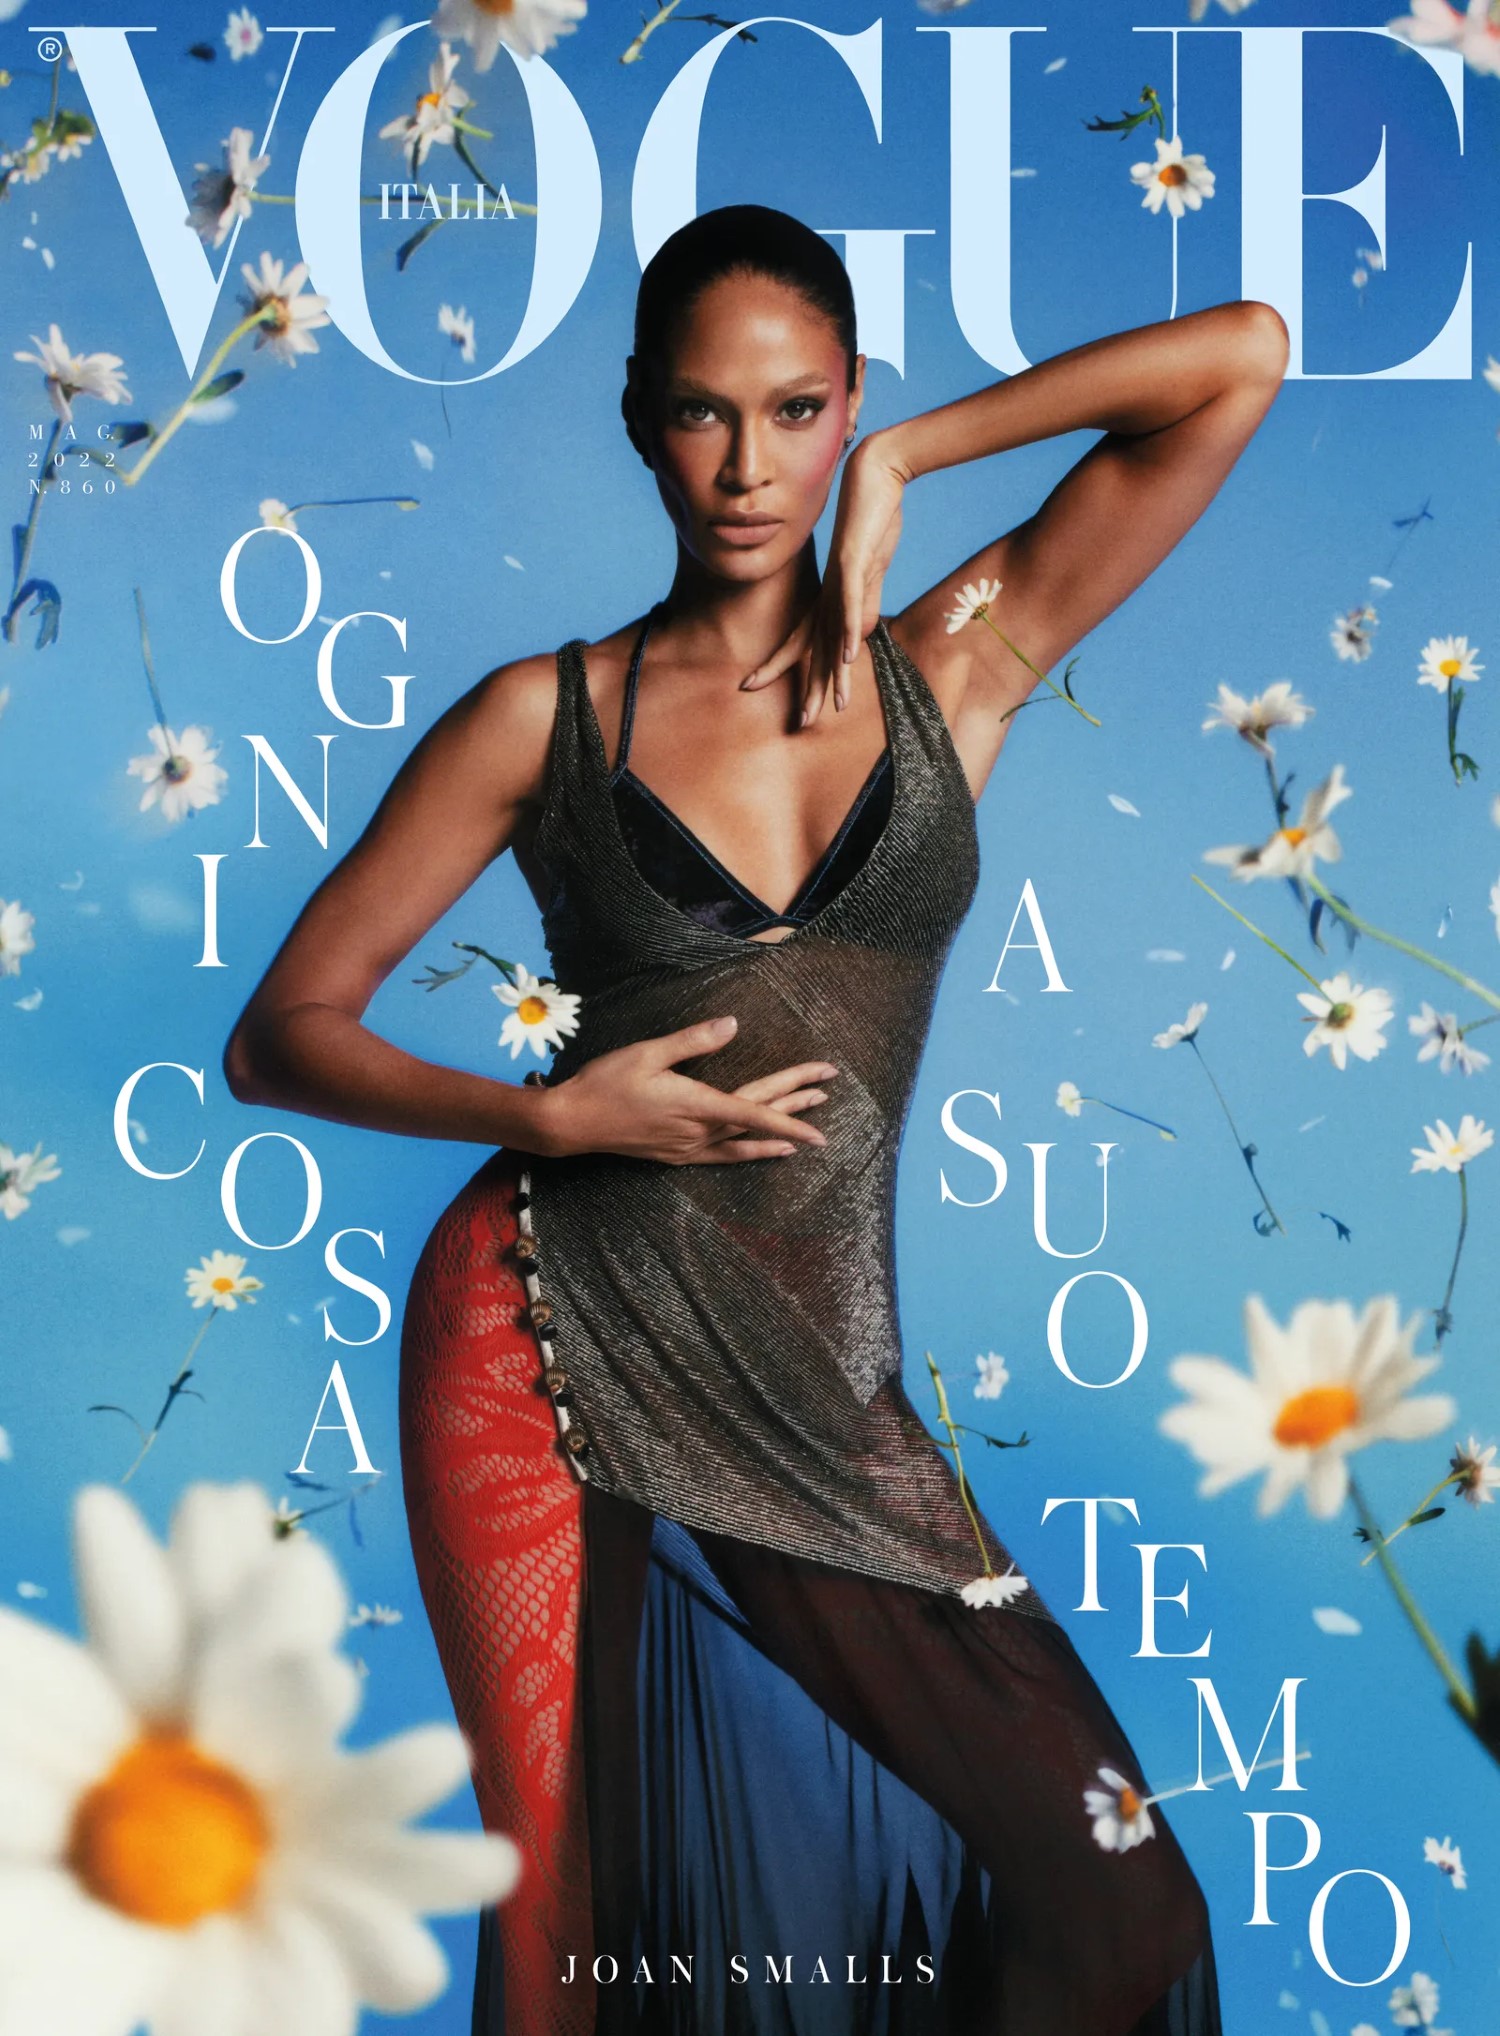 Joan Smalls in Louis Vuitton on Vogue Italia May 2022 cover by Cho